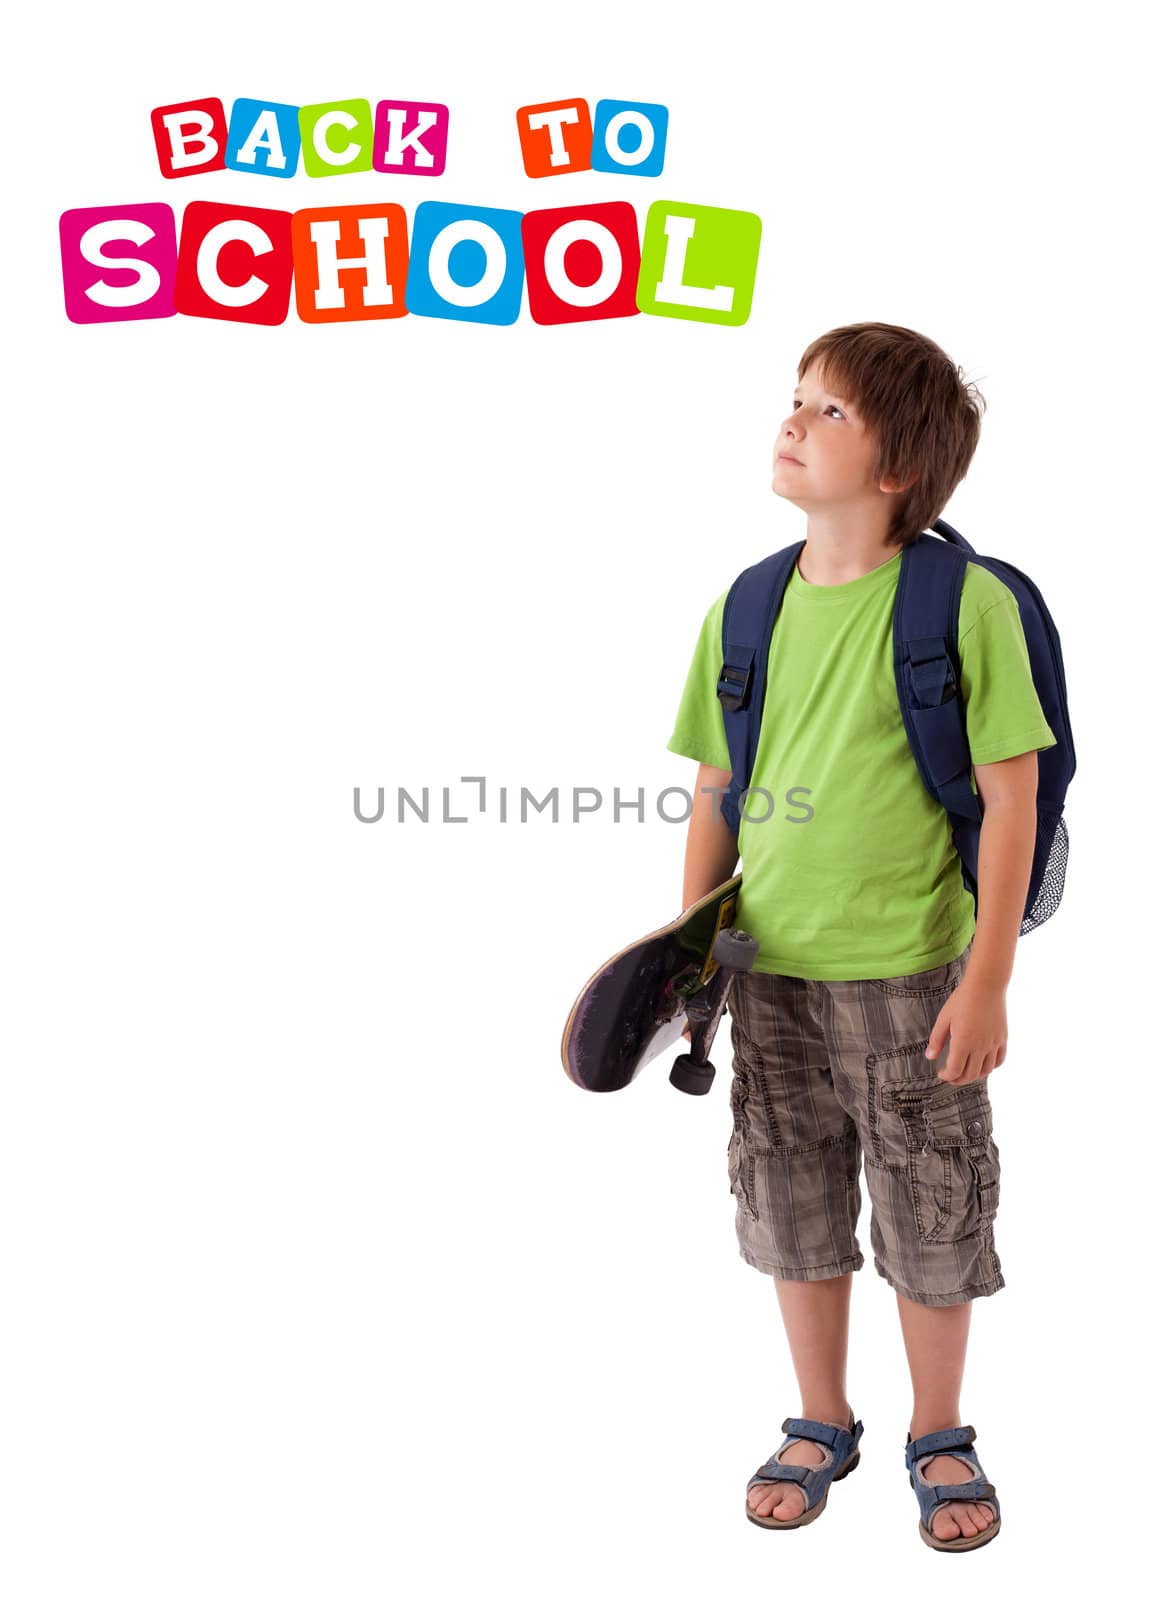 Boy with back to school theme isolated on white